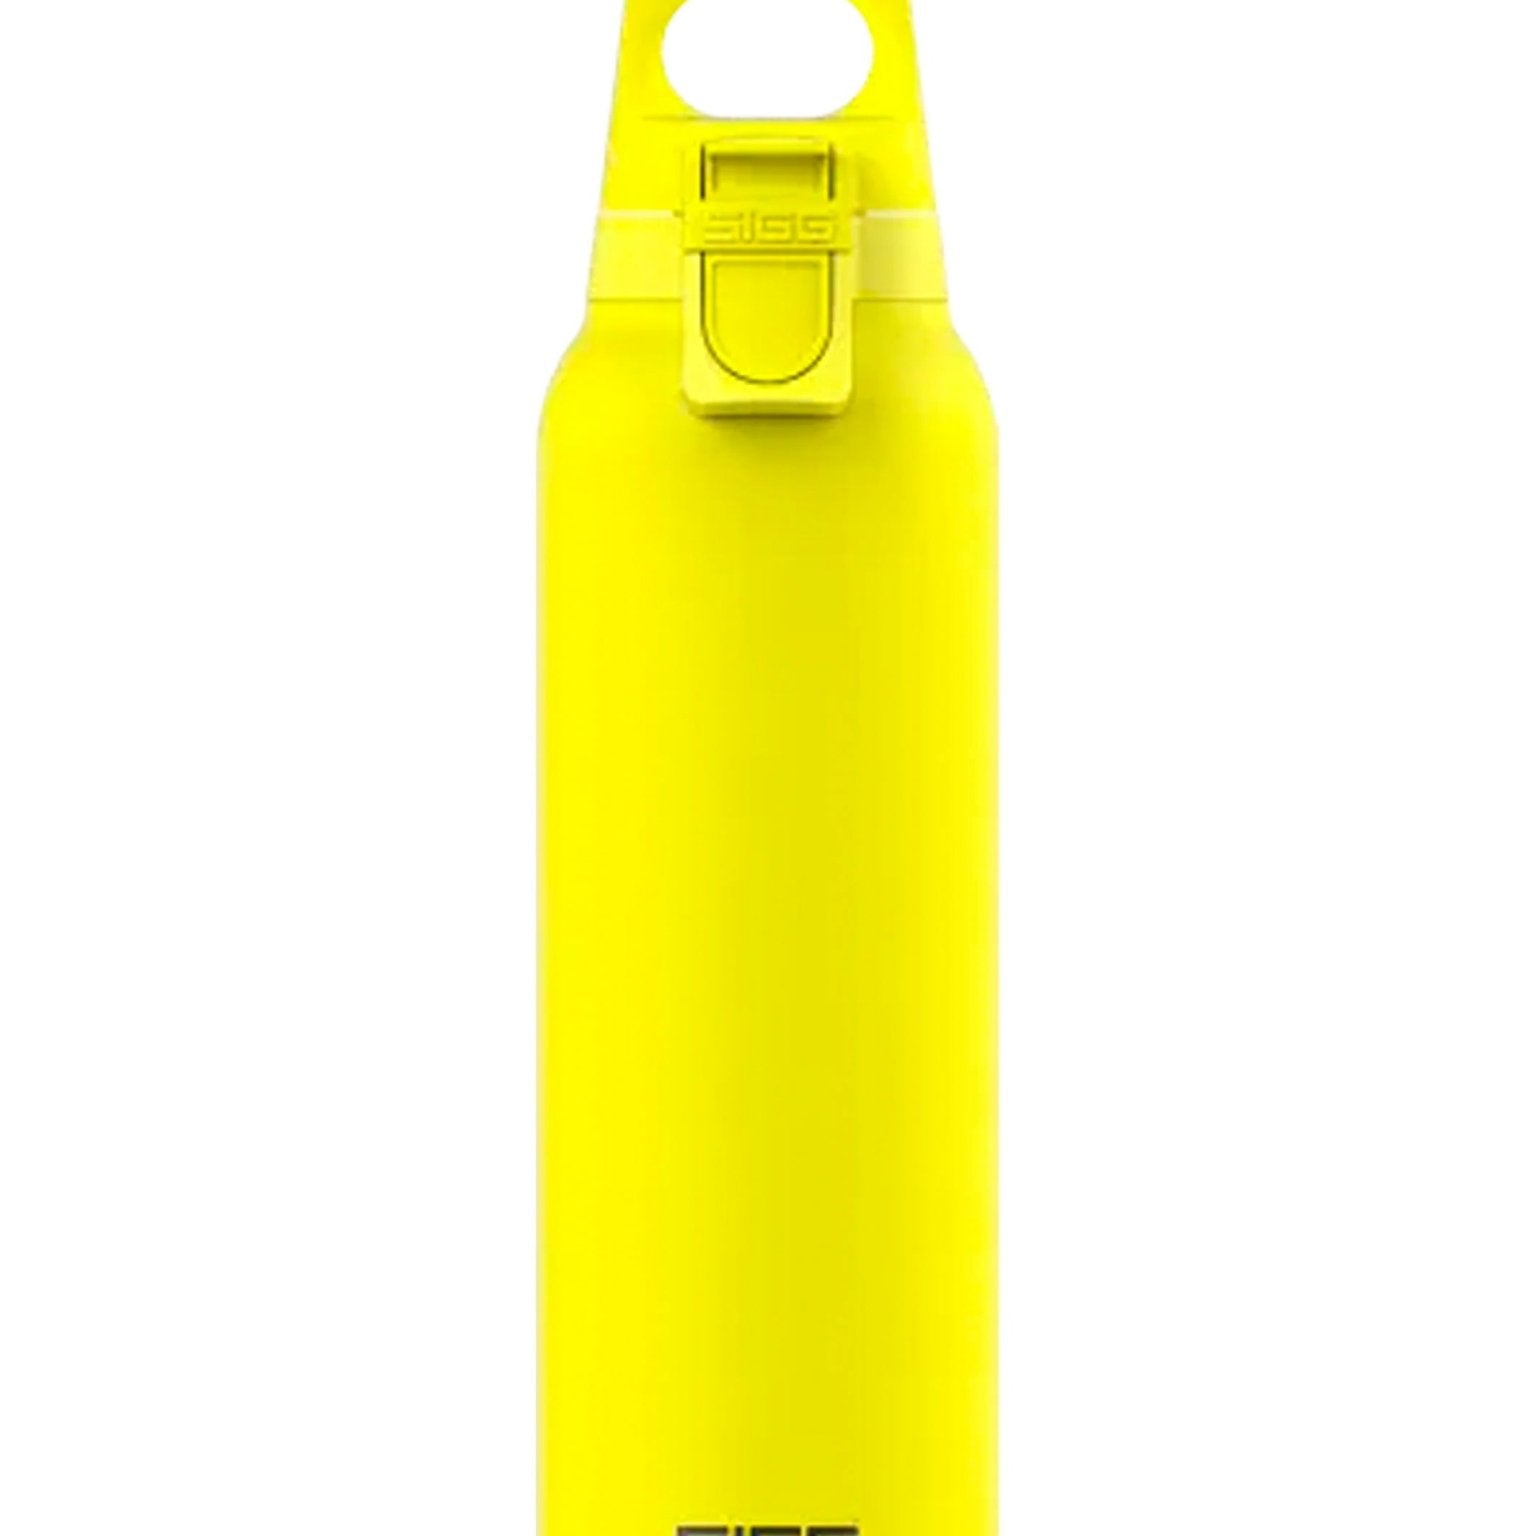 4elementsclothingSiggSIGG - Thermo Flask Hot & Cold ONE Light 0.55 LWater Bottles8997.80